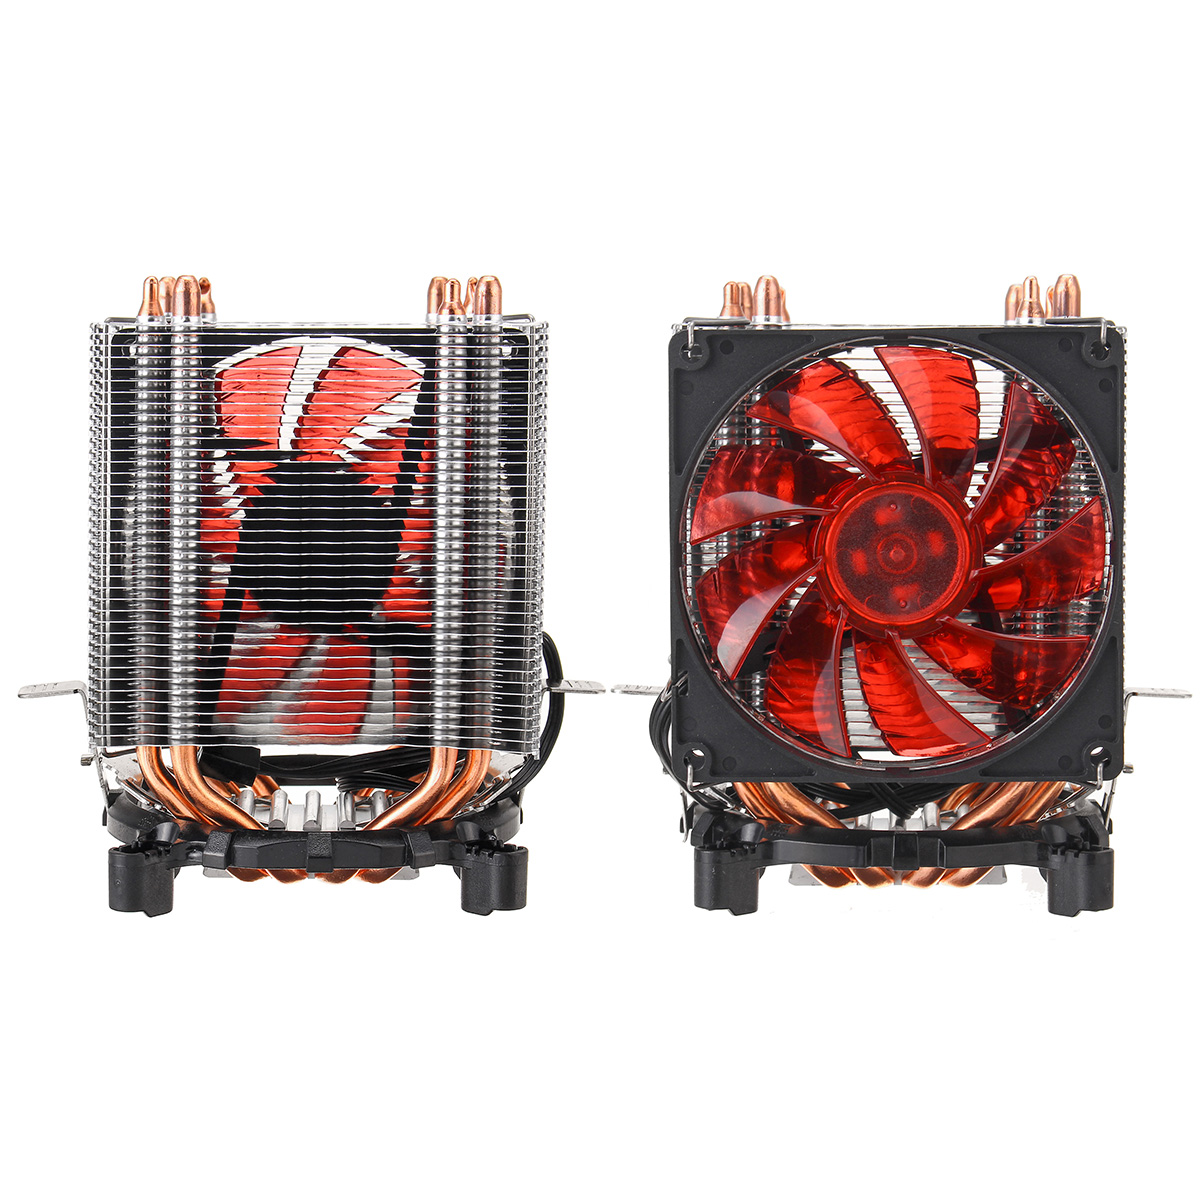 Find 3 Pin Four Copper Pipes Red Backlit CPU Cooling Fan for Intel 1155 1156 AMD for Sale on Gipsybee.com with cryptocurrencies